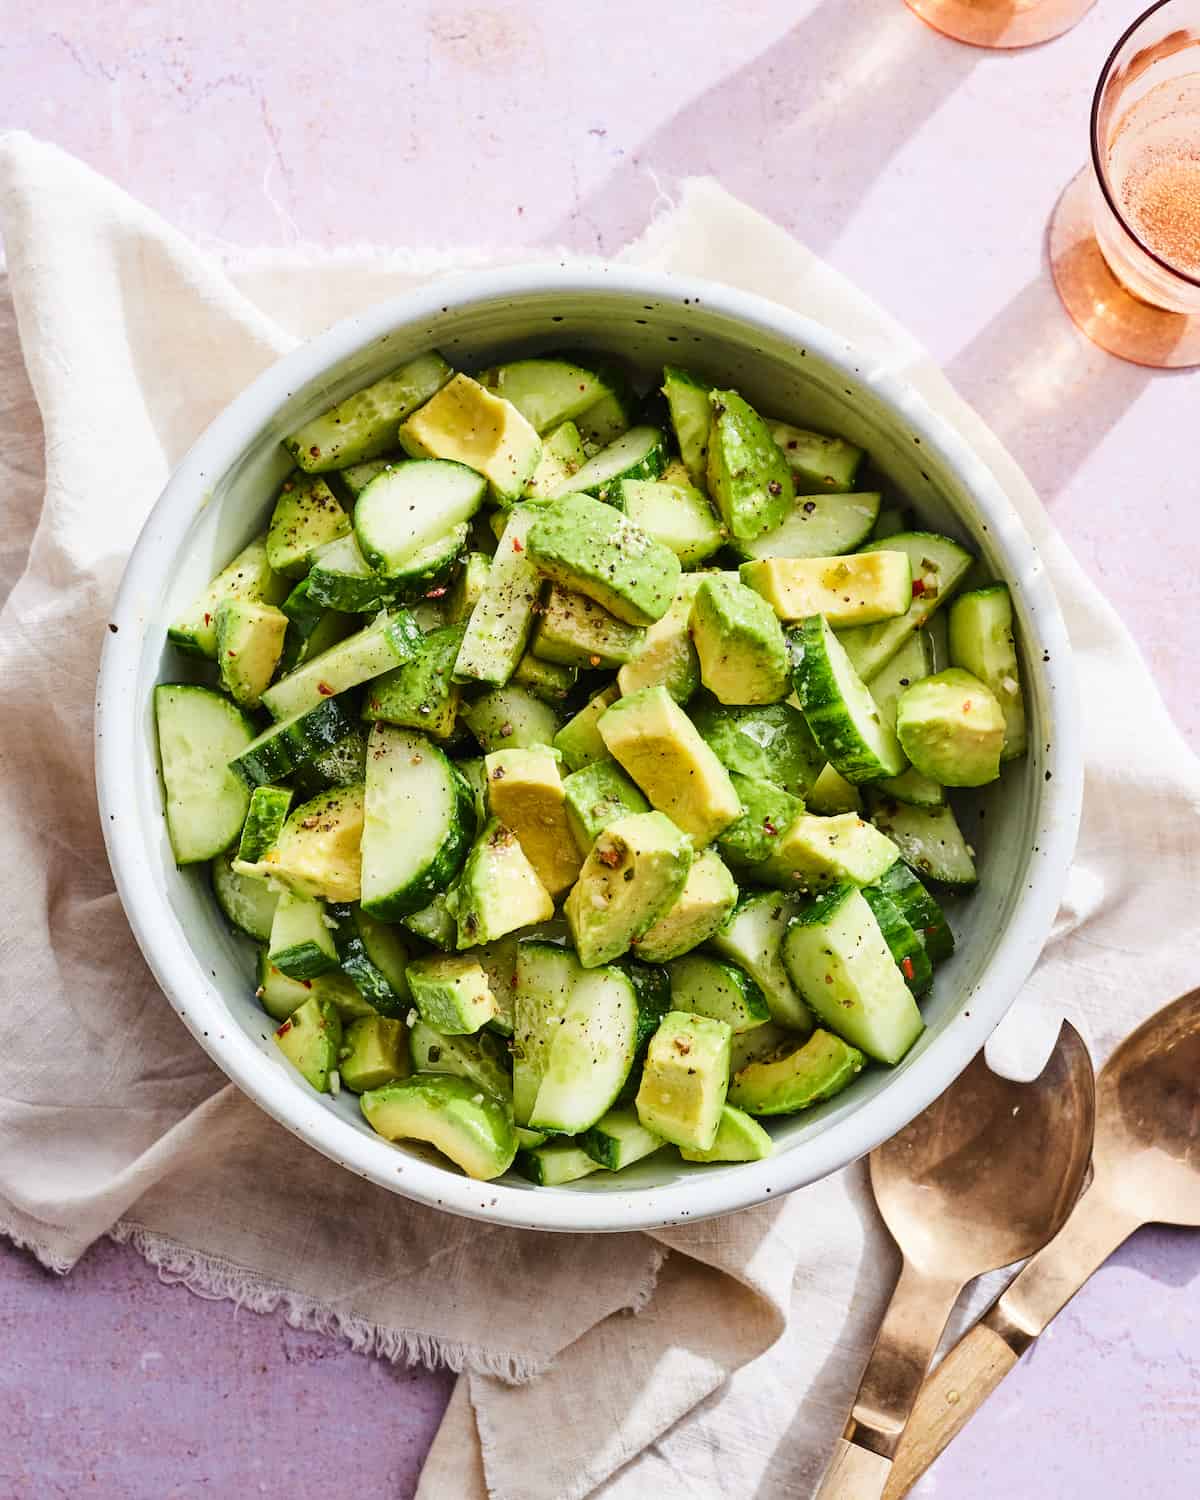 Cucumber salad in a ceramic bowl with sliced cucumbers and avocados mixed together in a vinaigrette. The bowl is on a cream linen napkin on a lavender table with two gold serving spoons in the bottom right corner and two orange glasses in the the top right corner